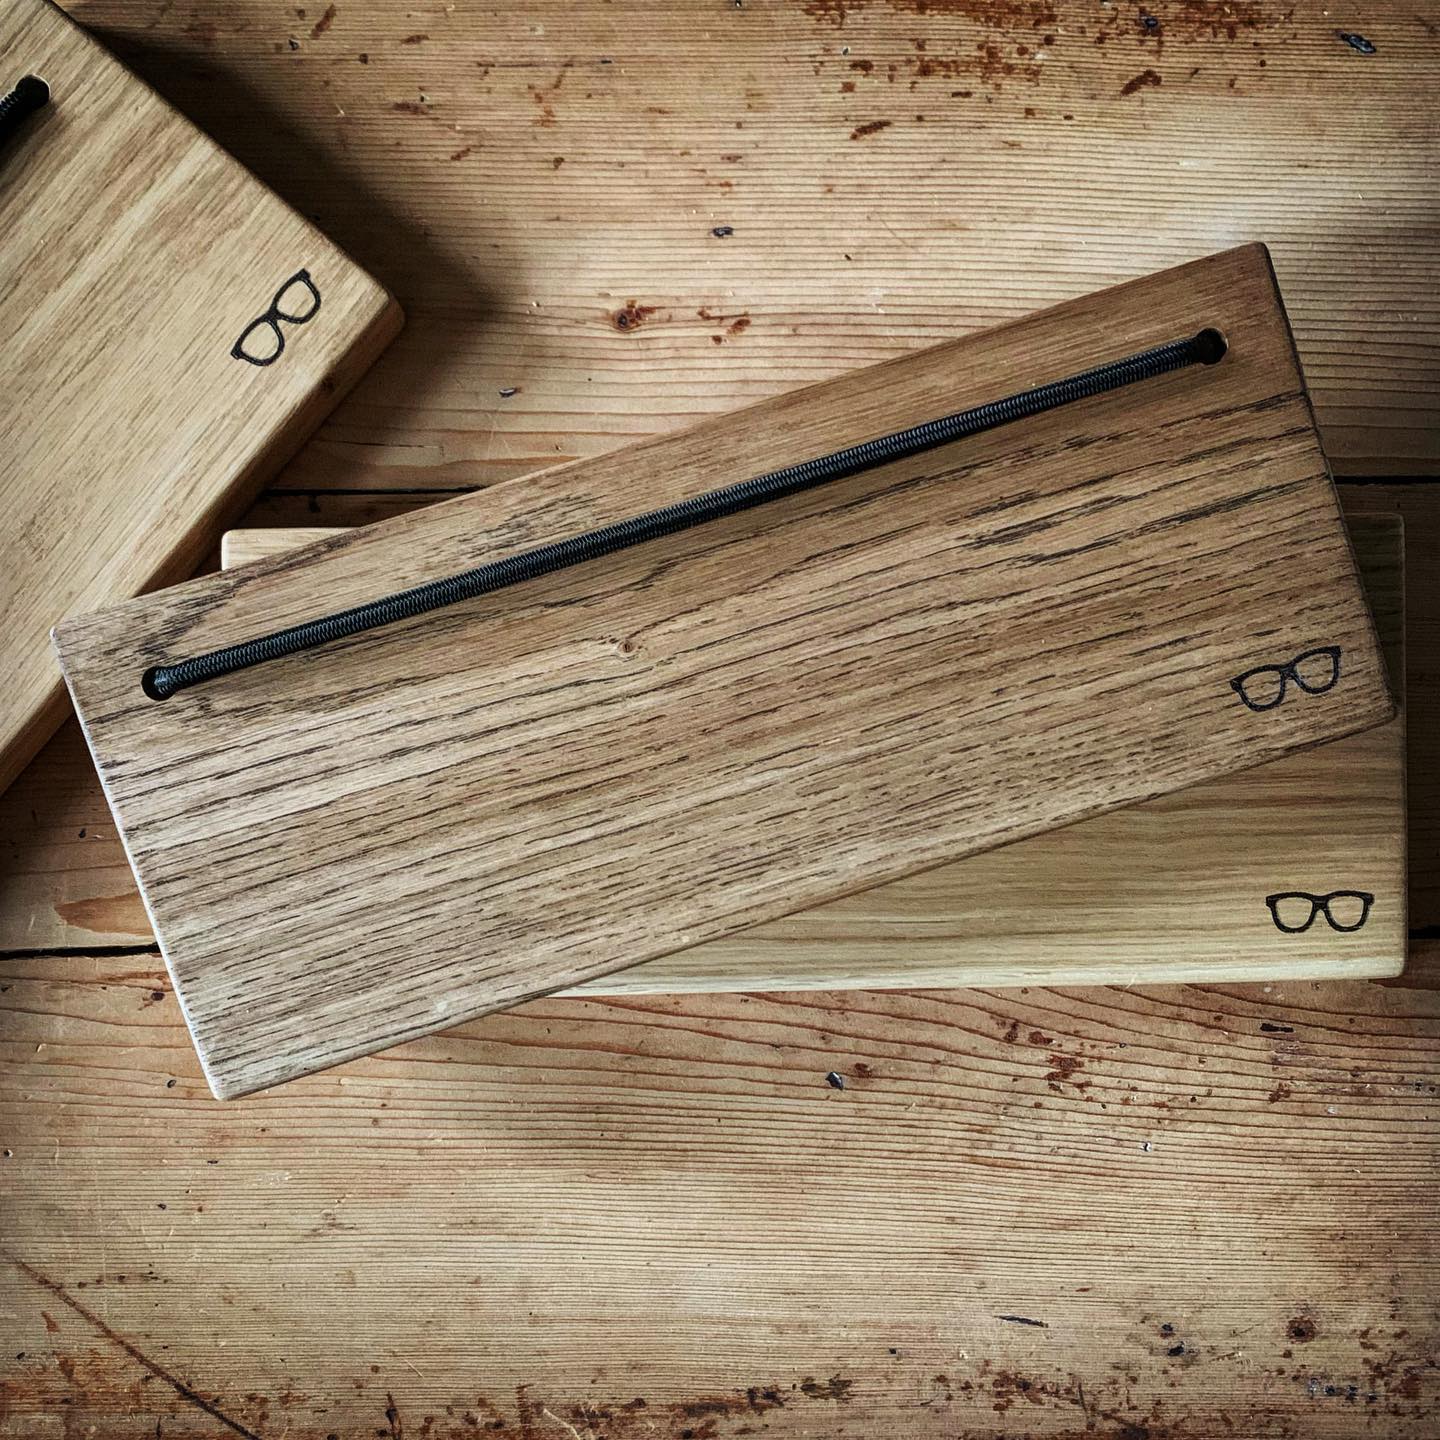 Just adding the finishing touches to a new batch of oak glasses holders. Soon available online in 2 finishes. #handcrafted #homeaccessories #craft #tidy #organise #display #uniquegift #shopsmall #supportlocal #visibilityfest